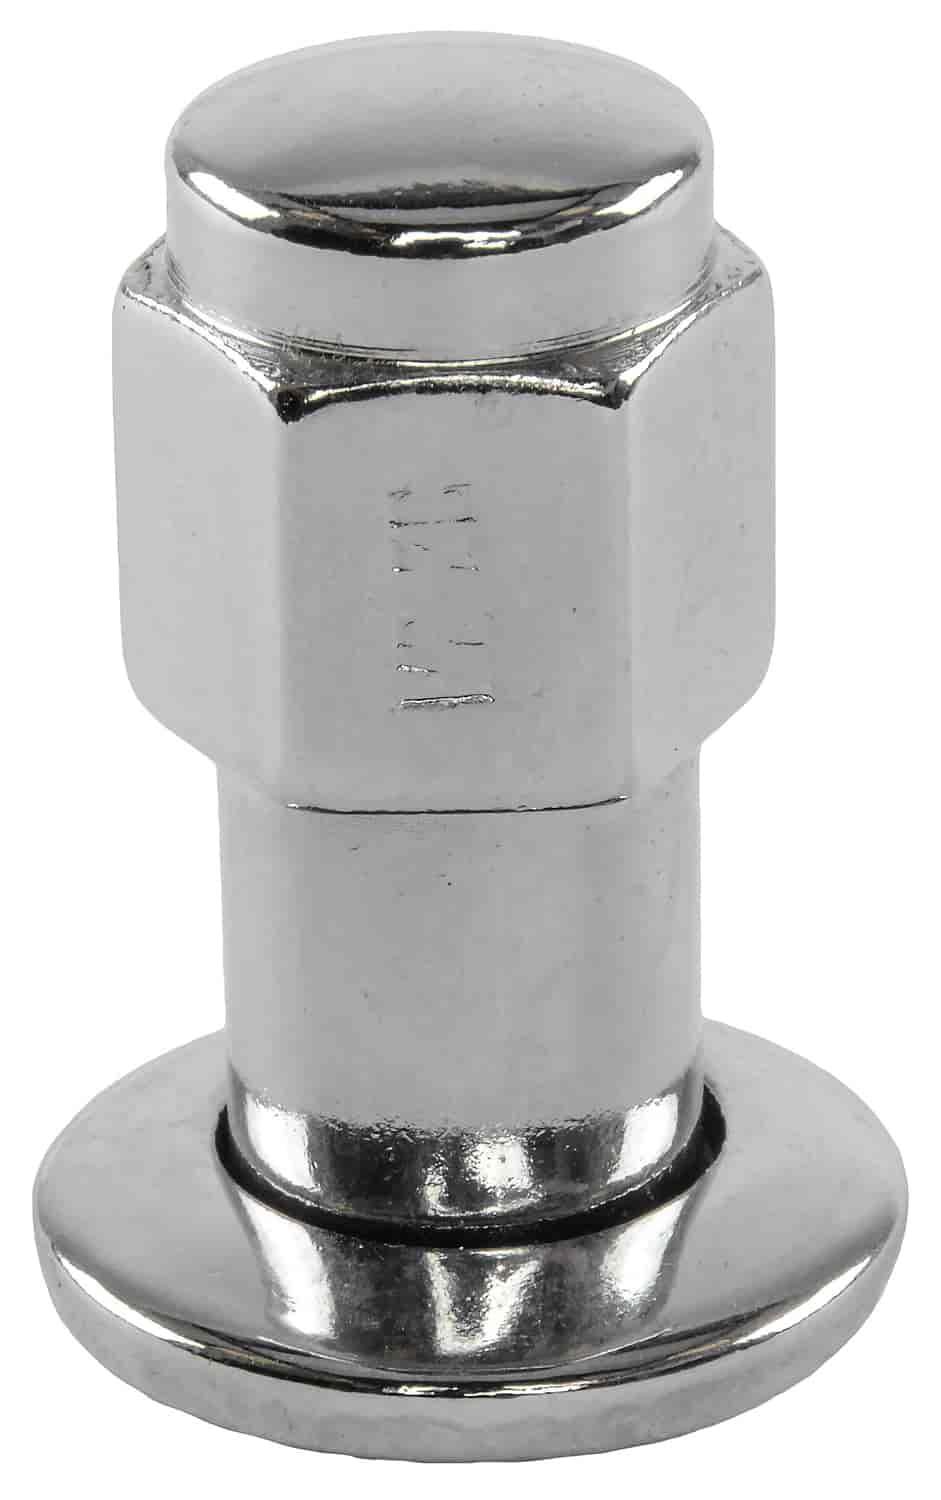 Standard Mag Lug Nuts, Closed-End with Off-Center Washers